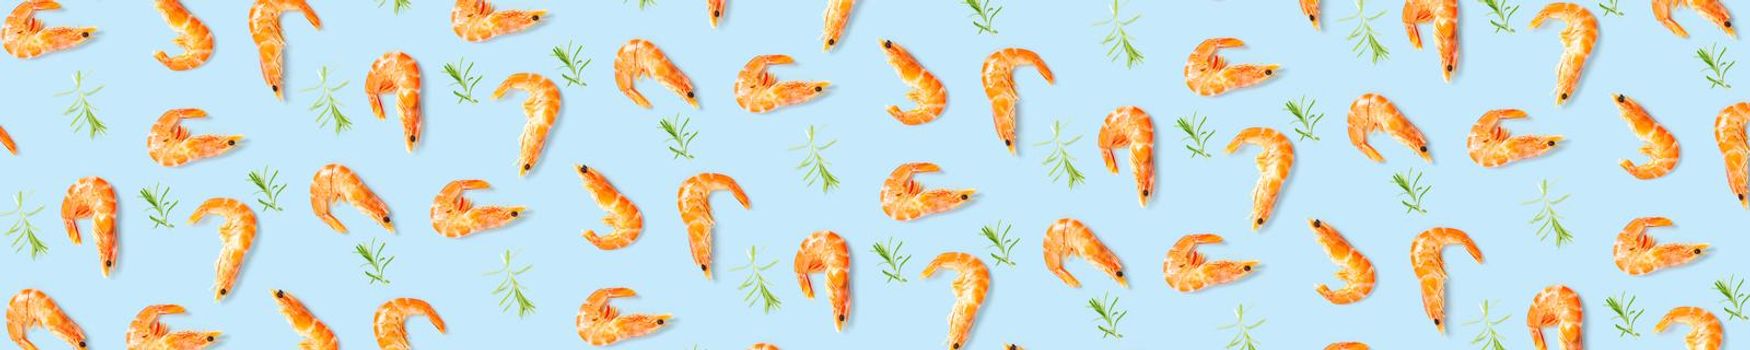 Tiger shrimp. Seafood background made from Prawns isolated on a blue backdrop. modern flat lay background from boiled shrimps, Seafood. not seamless pattern